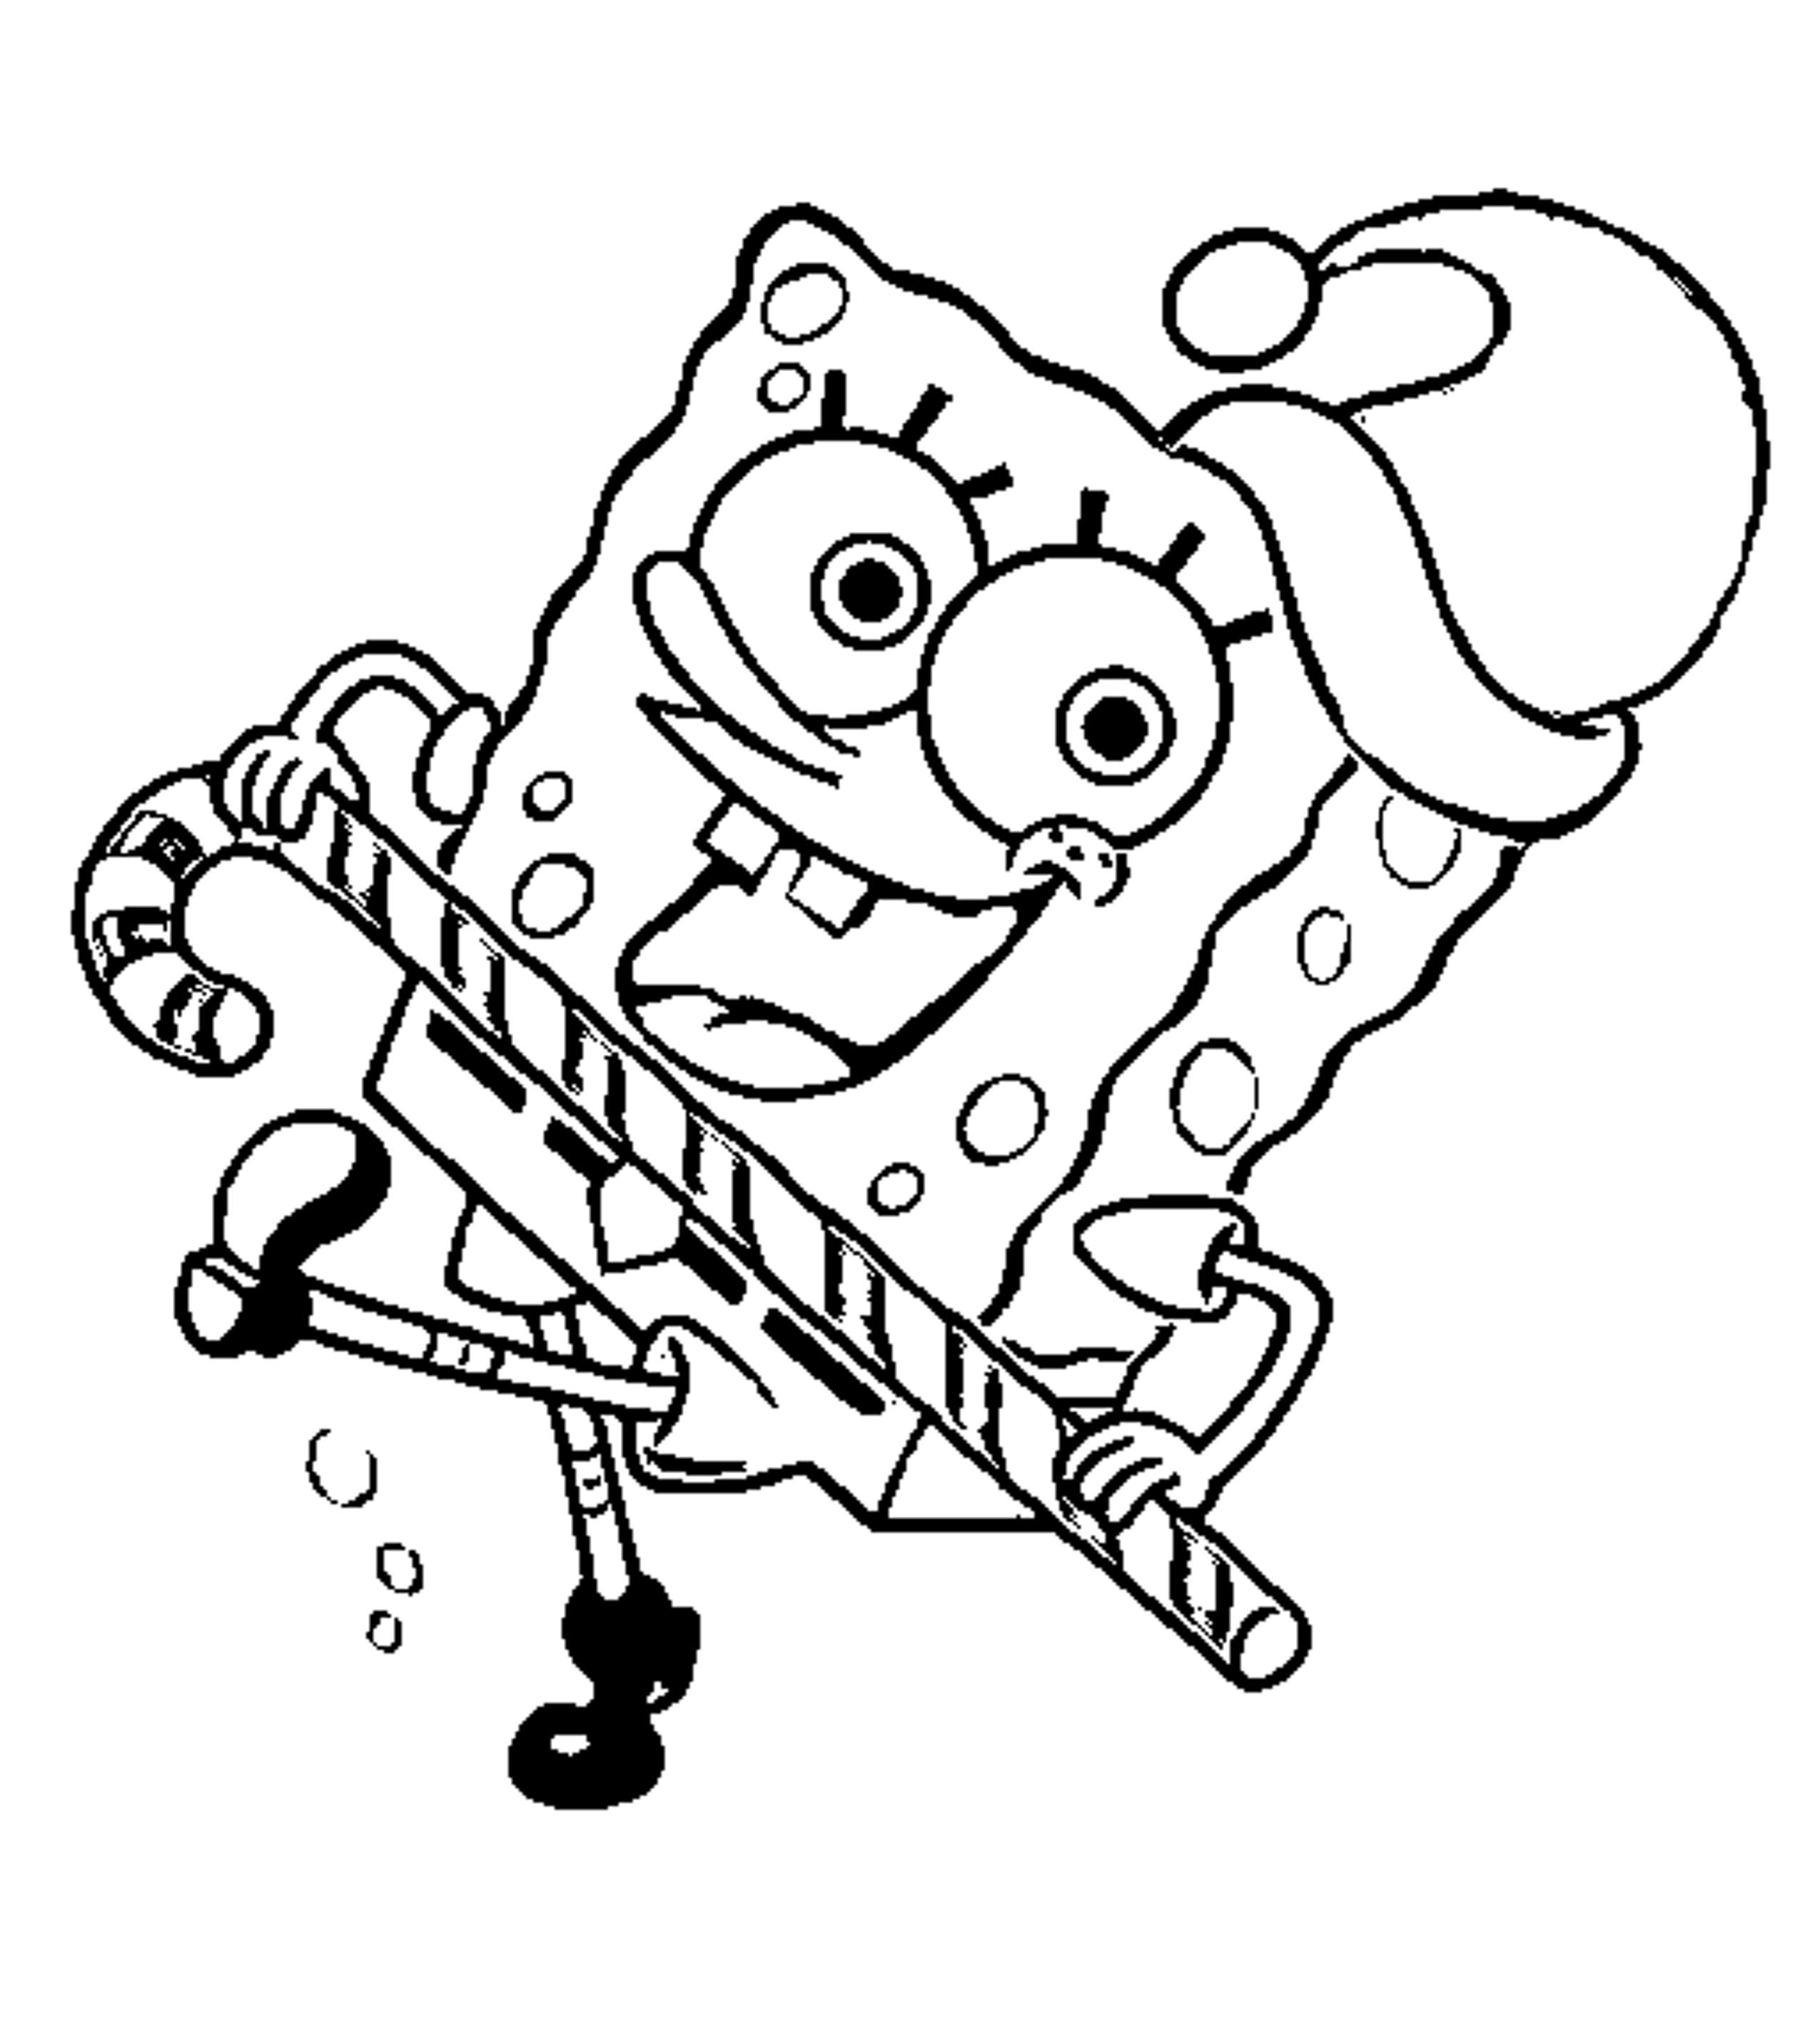 Patrick Spongebob Color Page Cartoon Characters Coloring Pages Coloring Home